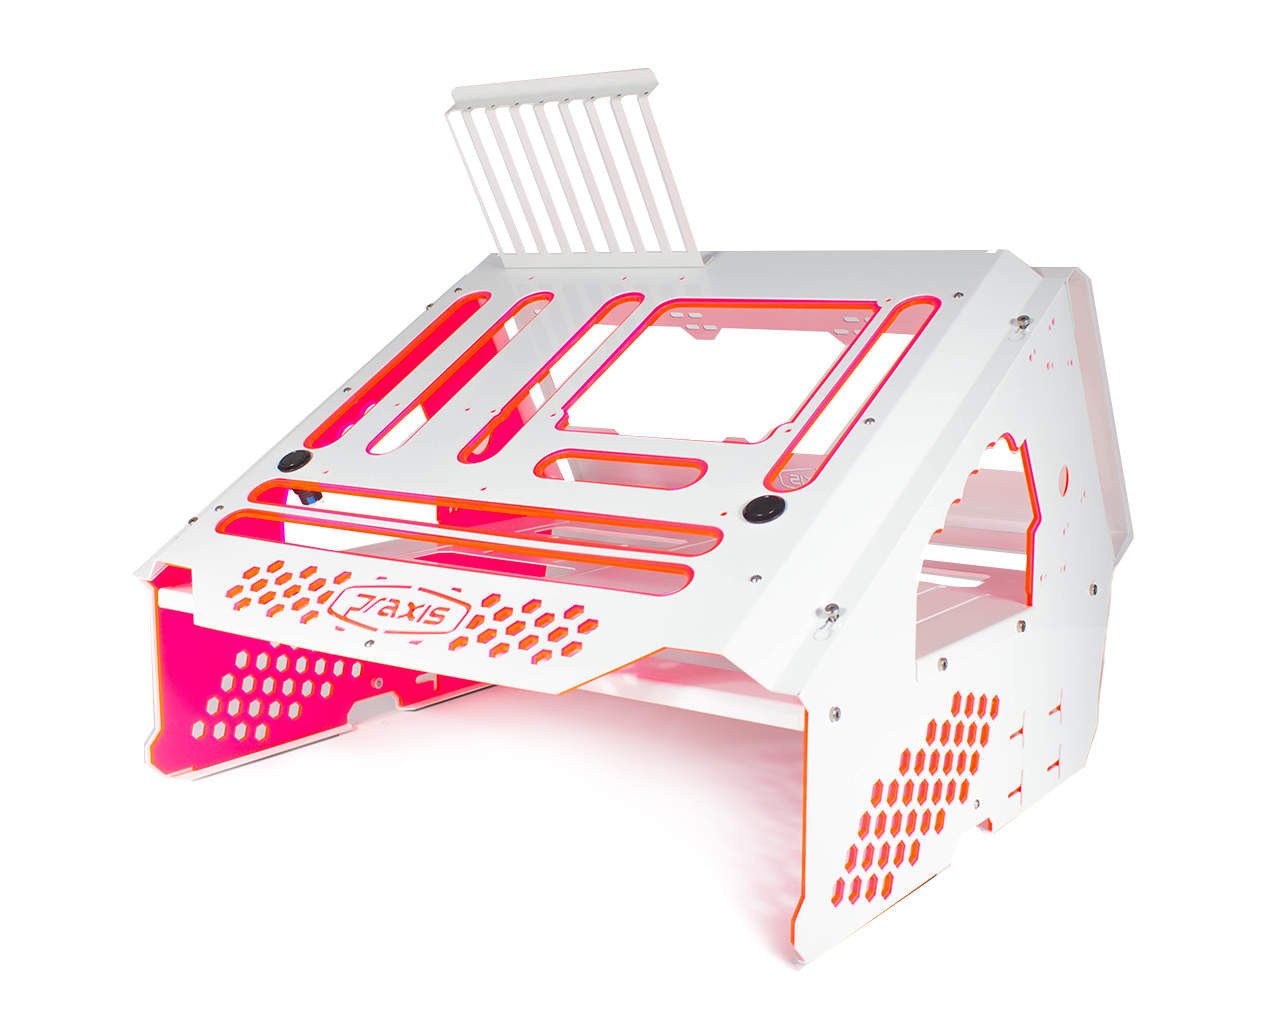 Praxis WetBench - PrimoChill - KEEPING IT COOL White w/UV Red/Pink Accents